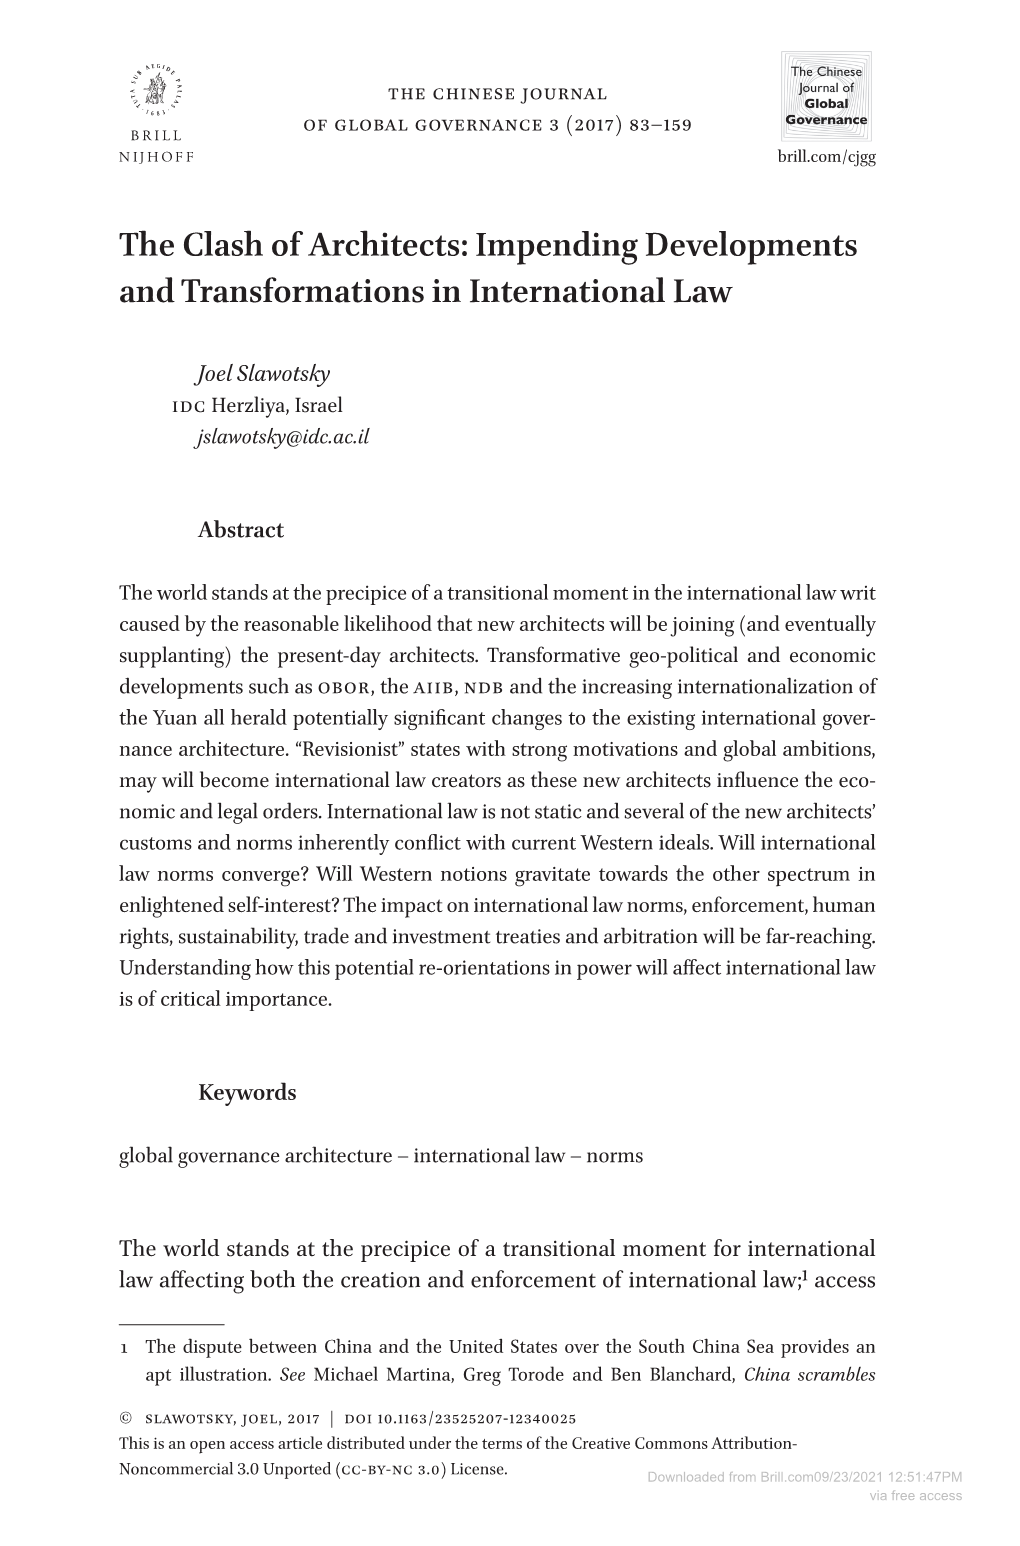 Impending Developments and Transformations in International Law